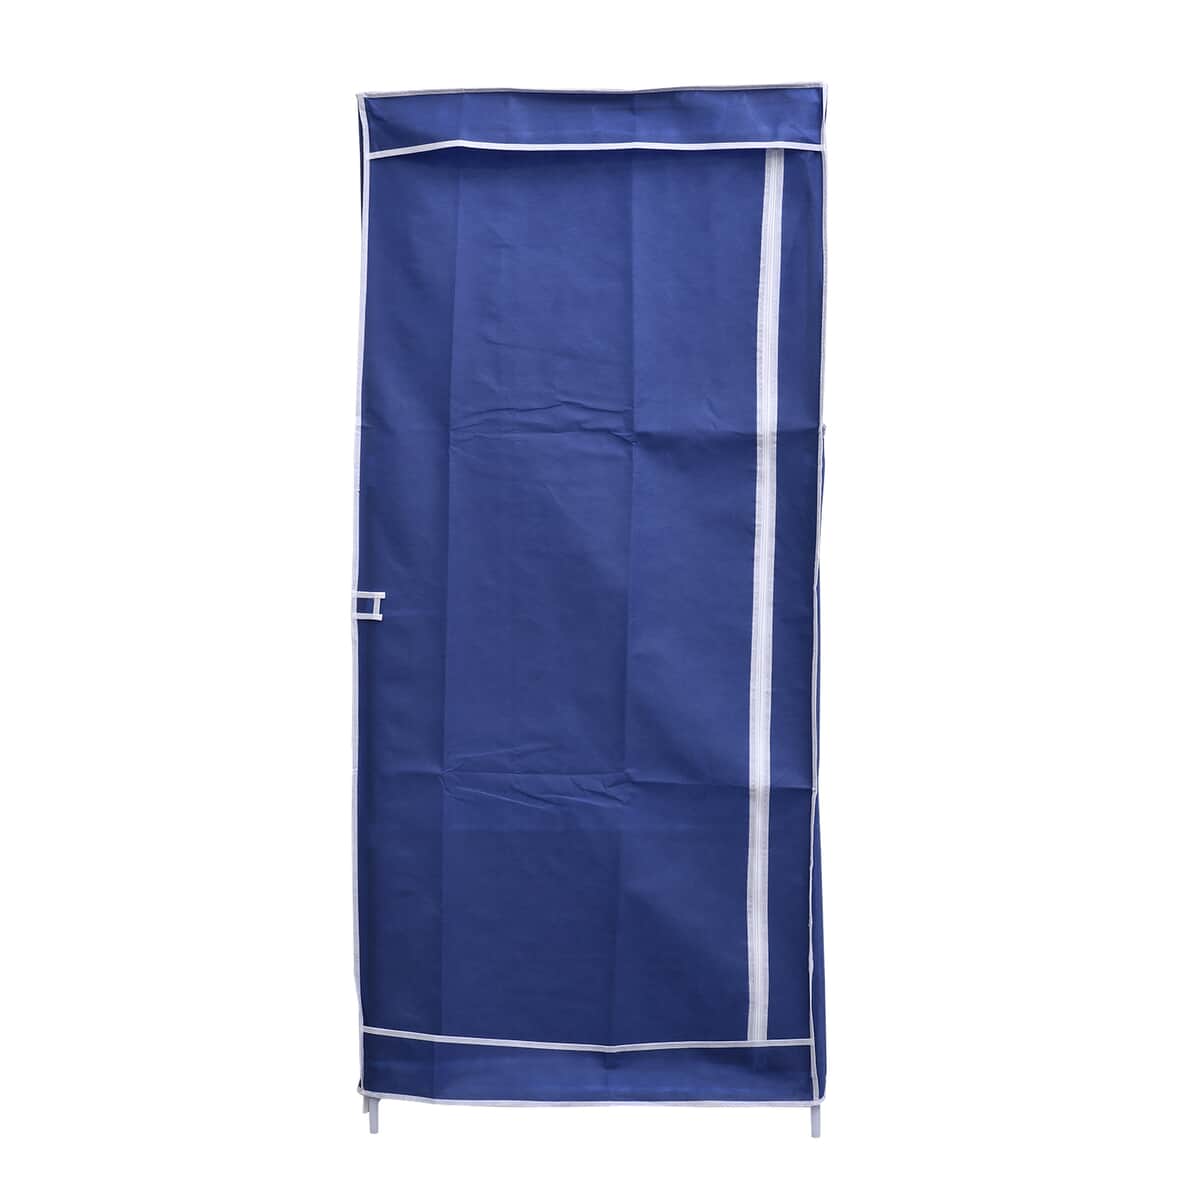 Blue Collapsible Wardrobe with 2 Outer pockets and Zippered Door (Non-Woven Fabric) image number 0